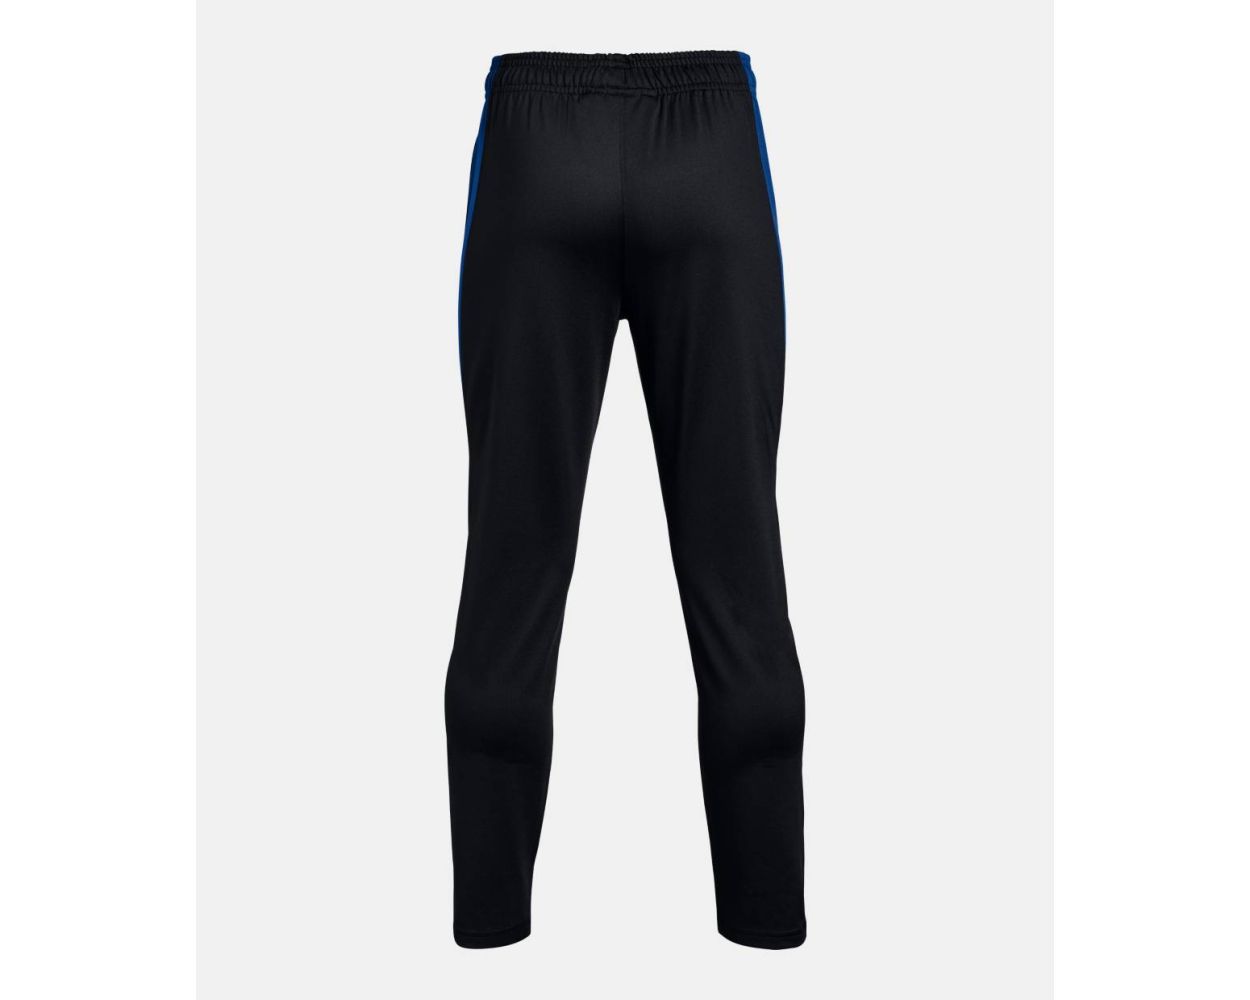 Under Armour Challenger Training - Training Pants Track Pants